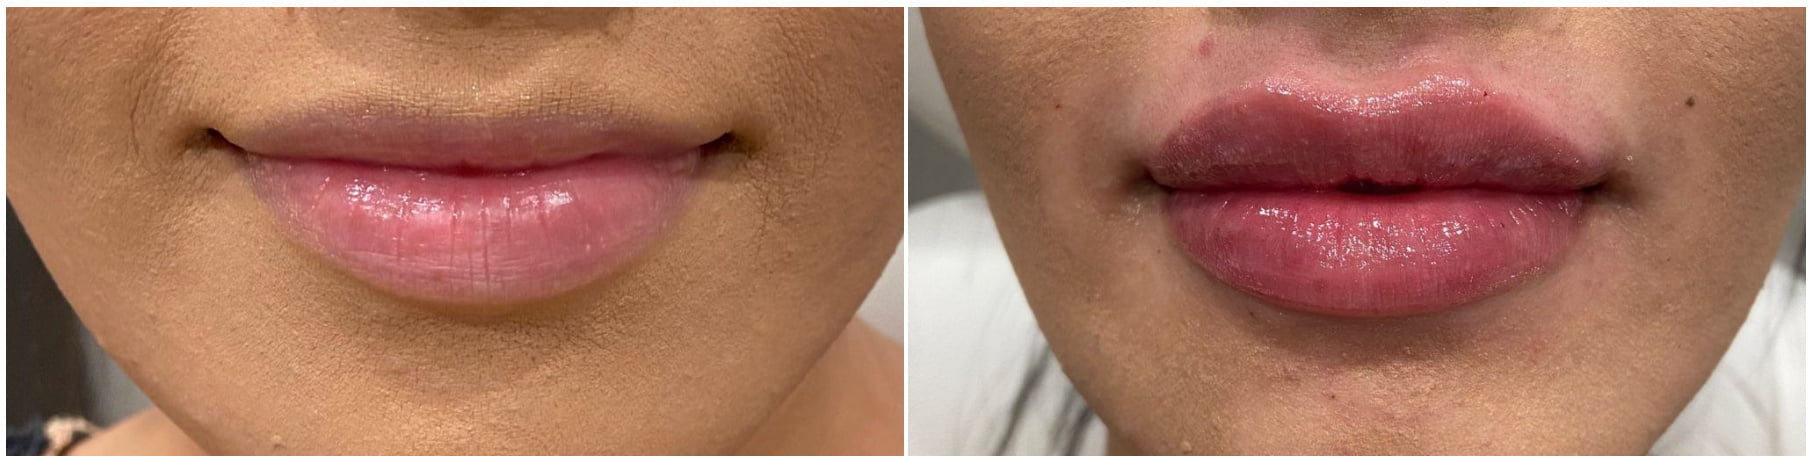 Before and after Restylane injection in the lips to treat lines and add volume 